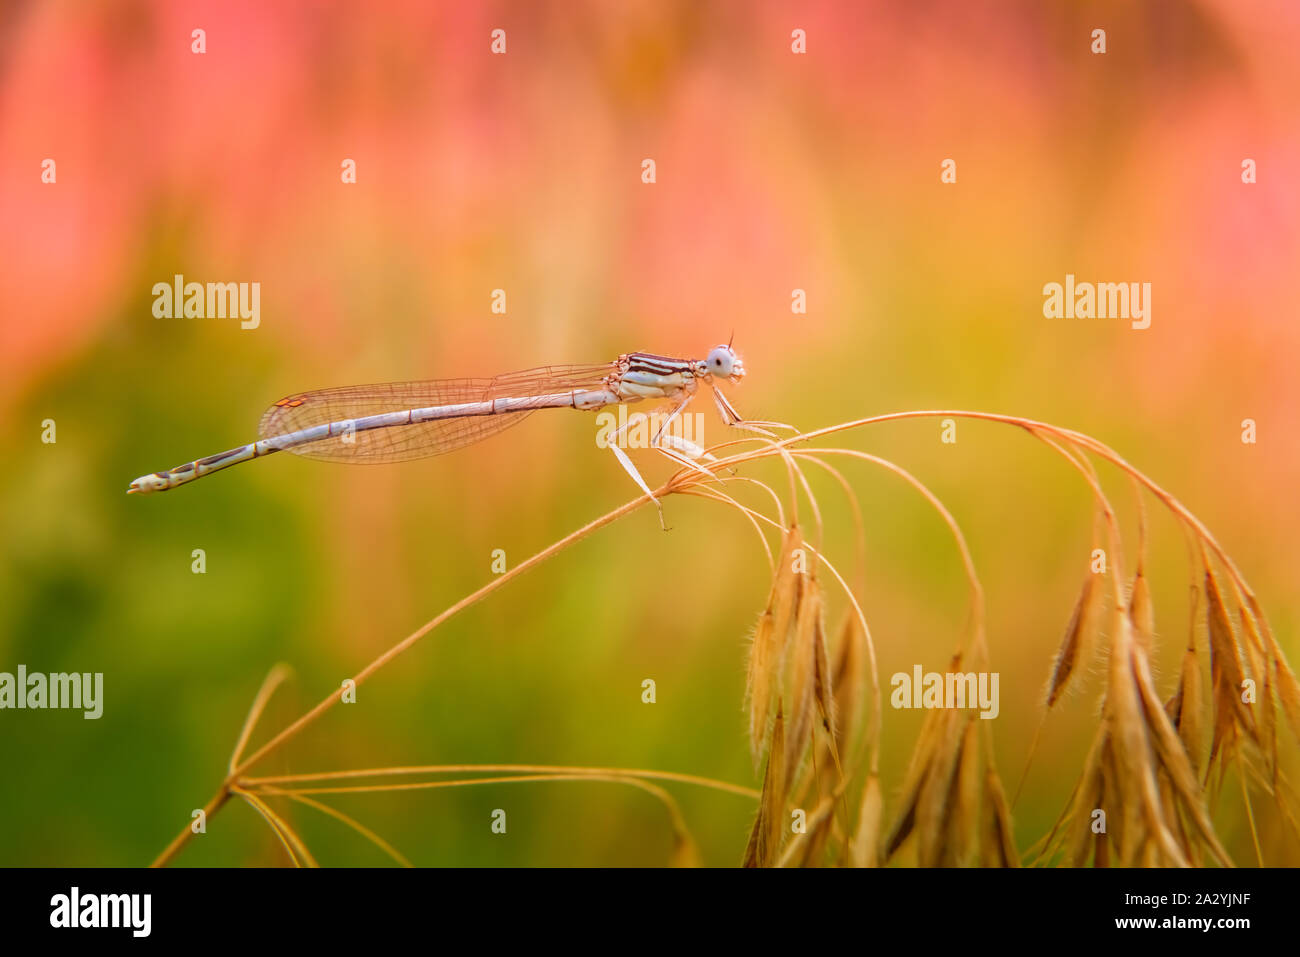 Close-up of beautiful small turquoise colored dragonfly resting on dry grass. Selective focus. Unfocused pink and green blooming meadow at background. Stock Photo